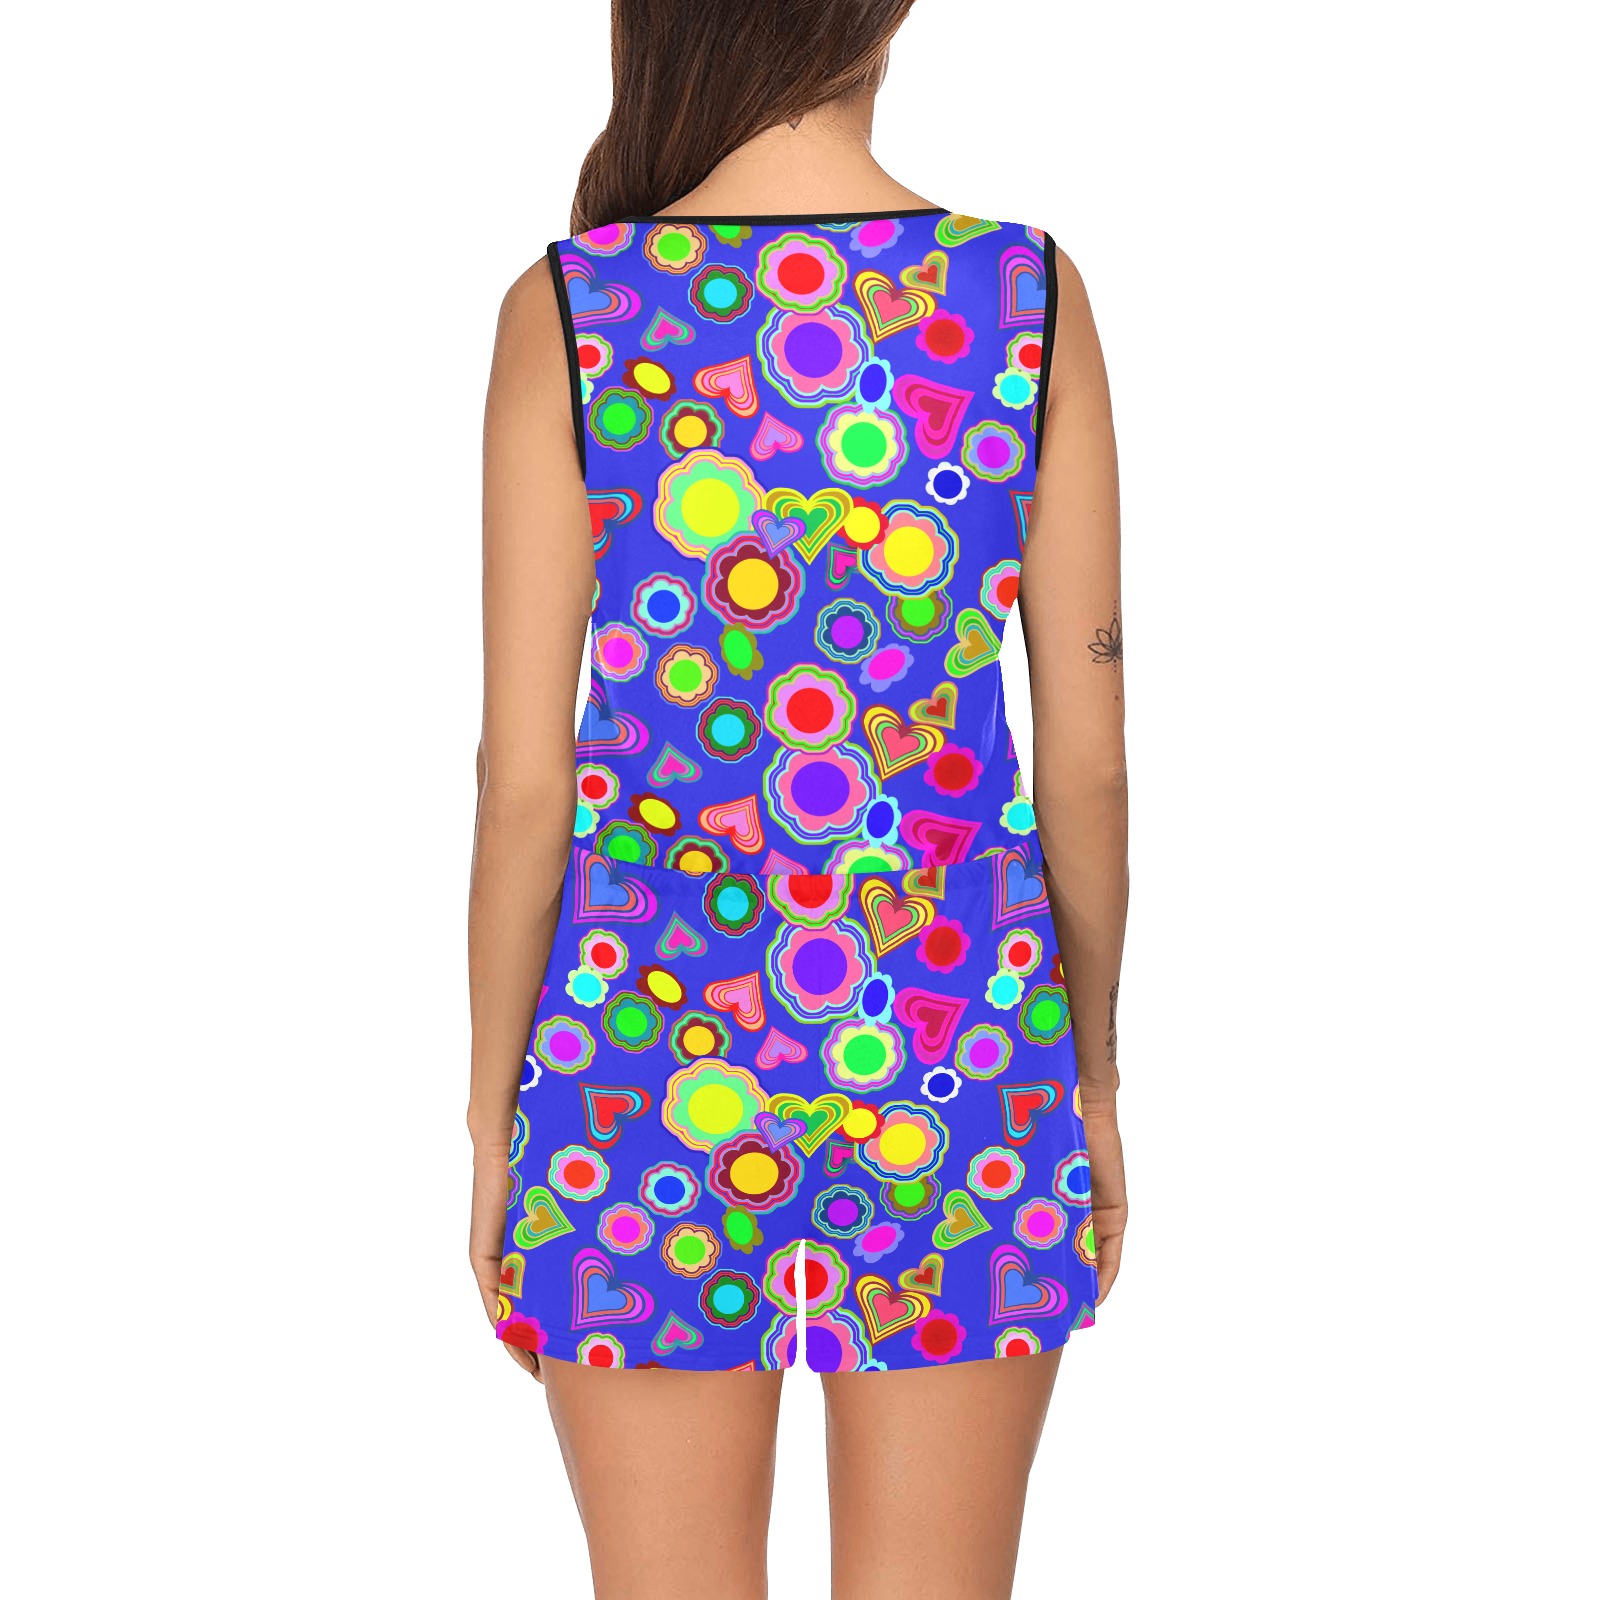 Groovy Hearts and Flowers Blue All Over Print Short Jumpsuit